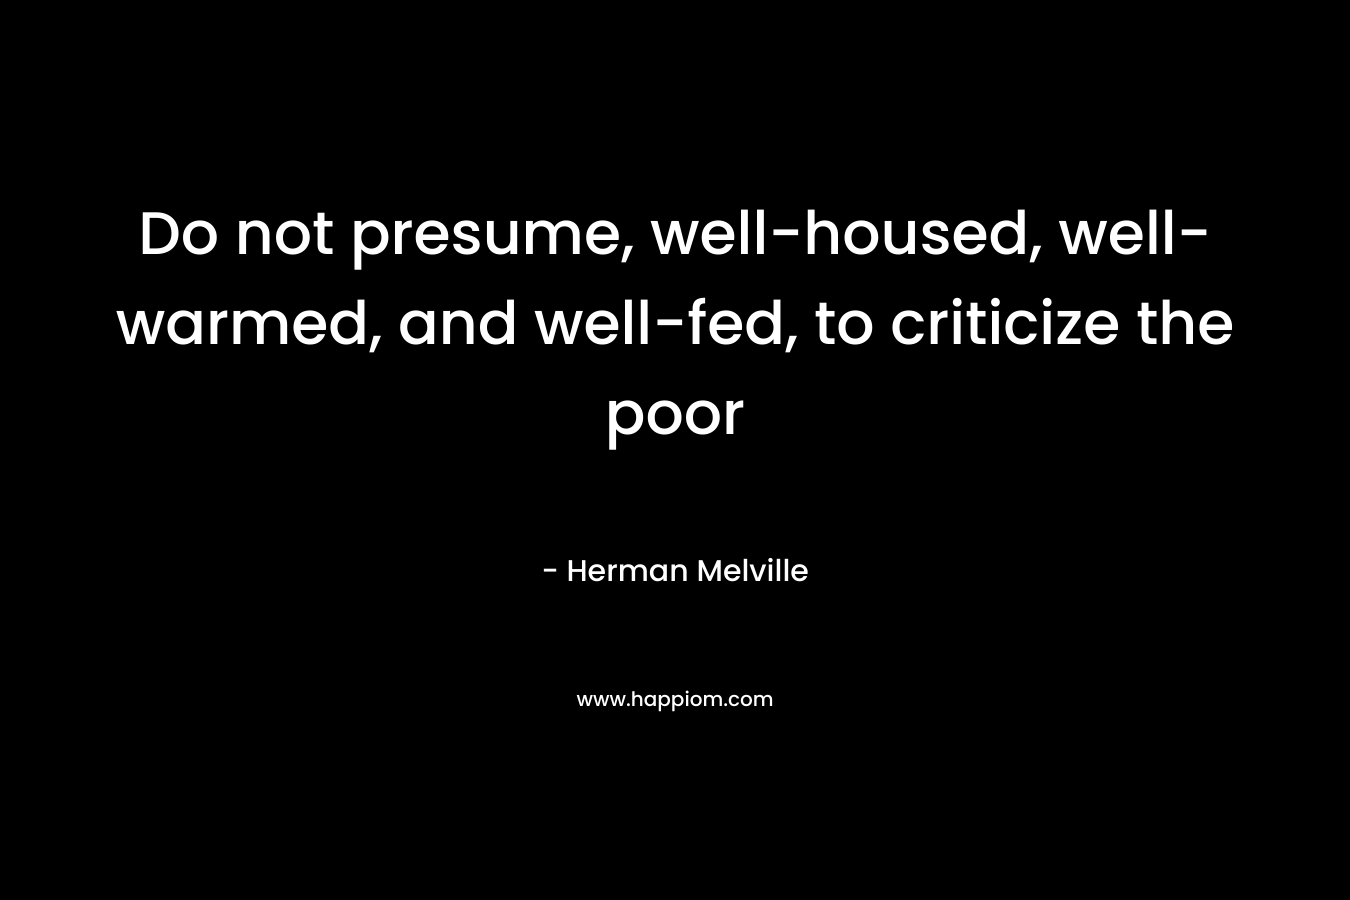 Do not presume, well-housed, well-warmed, and well-fed, to criticize the poor – Herman Melville